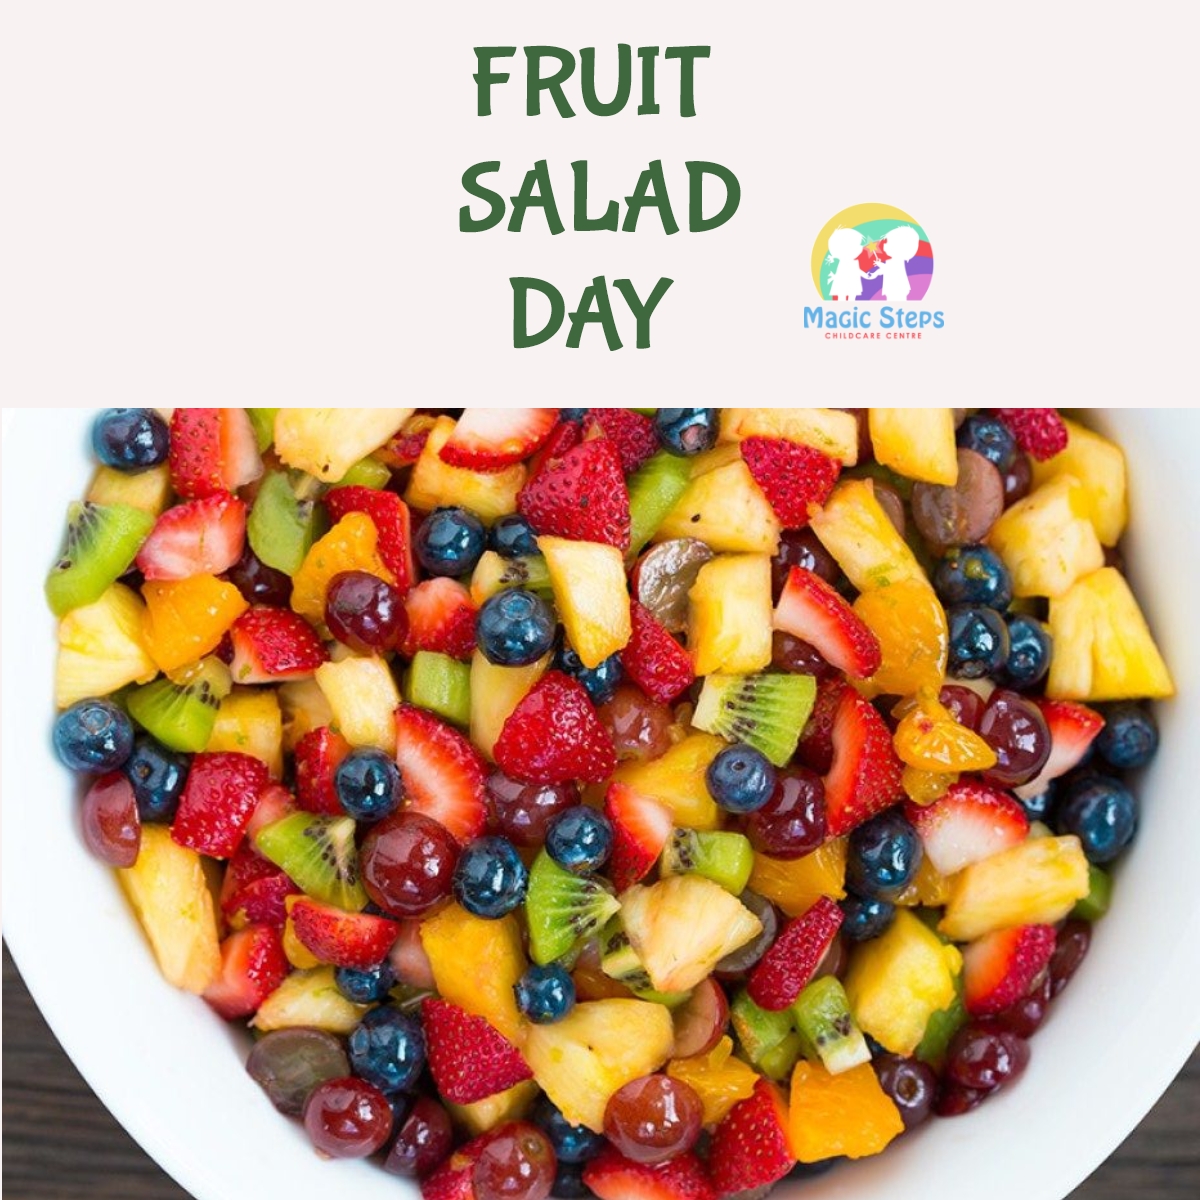 Fruit Salad Day- Tuesday 24th August